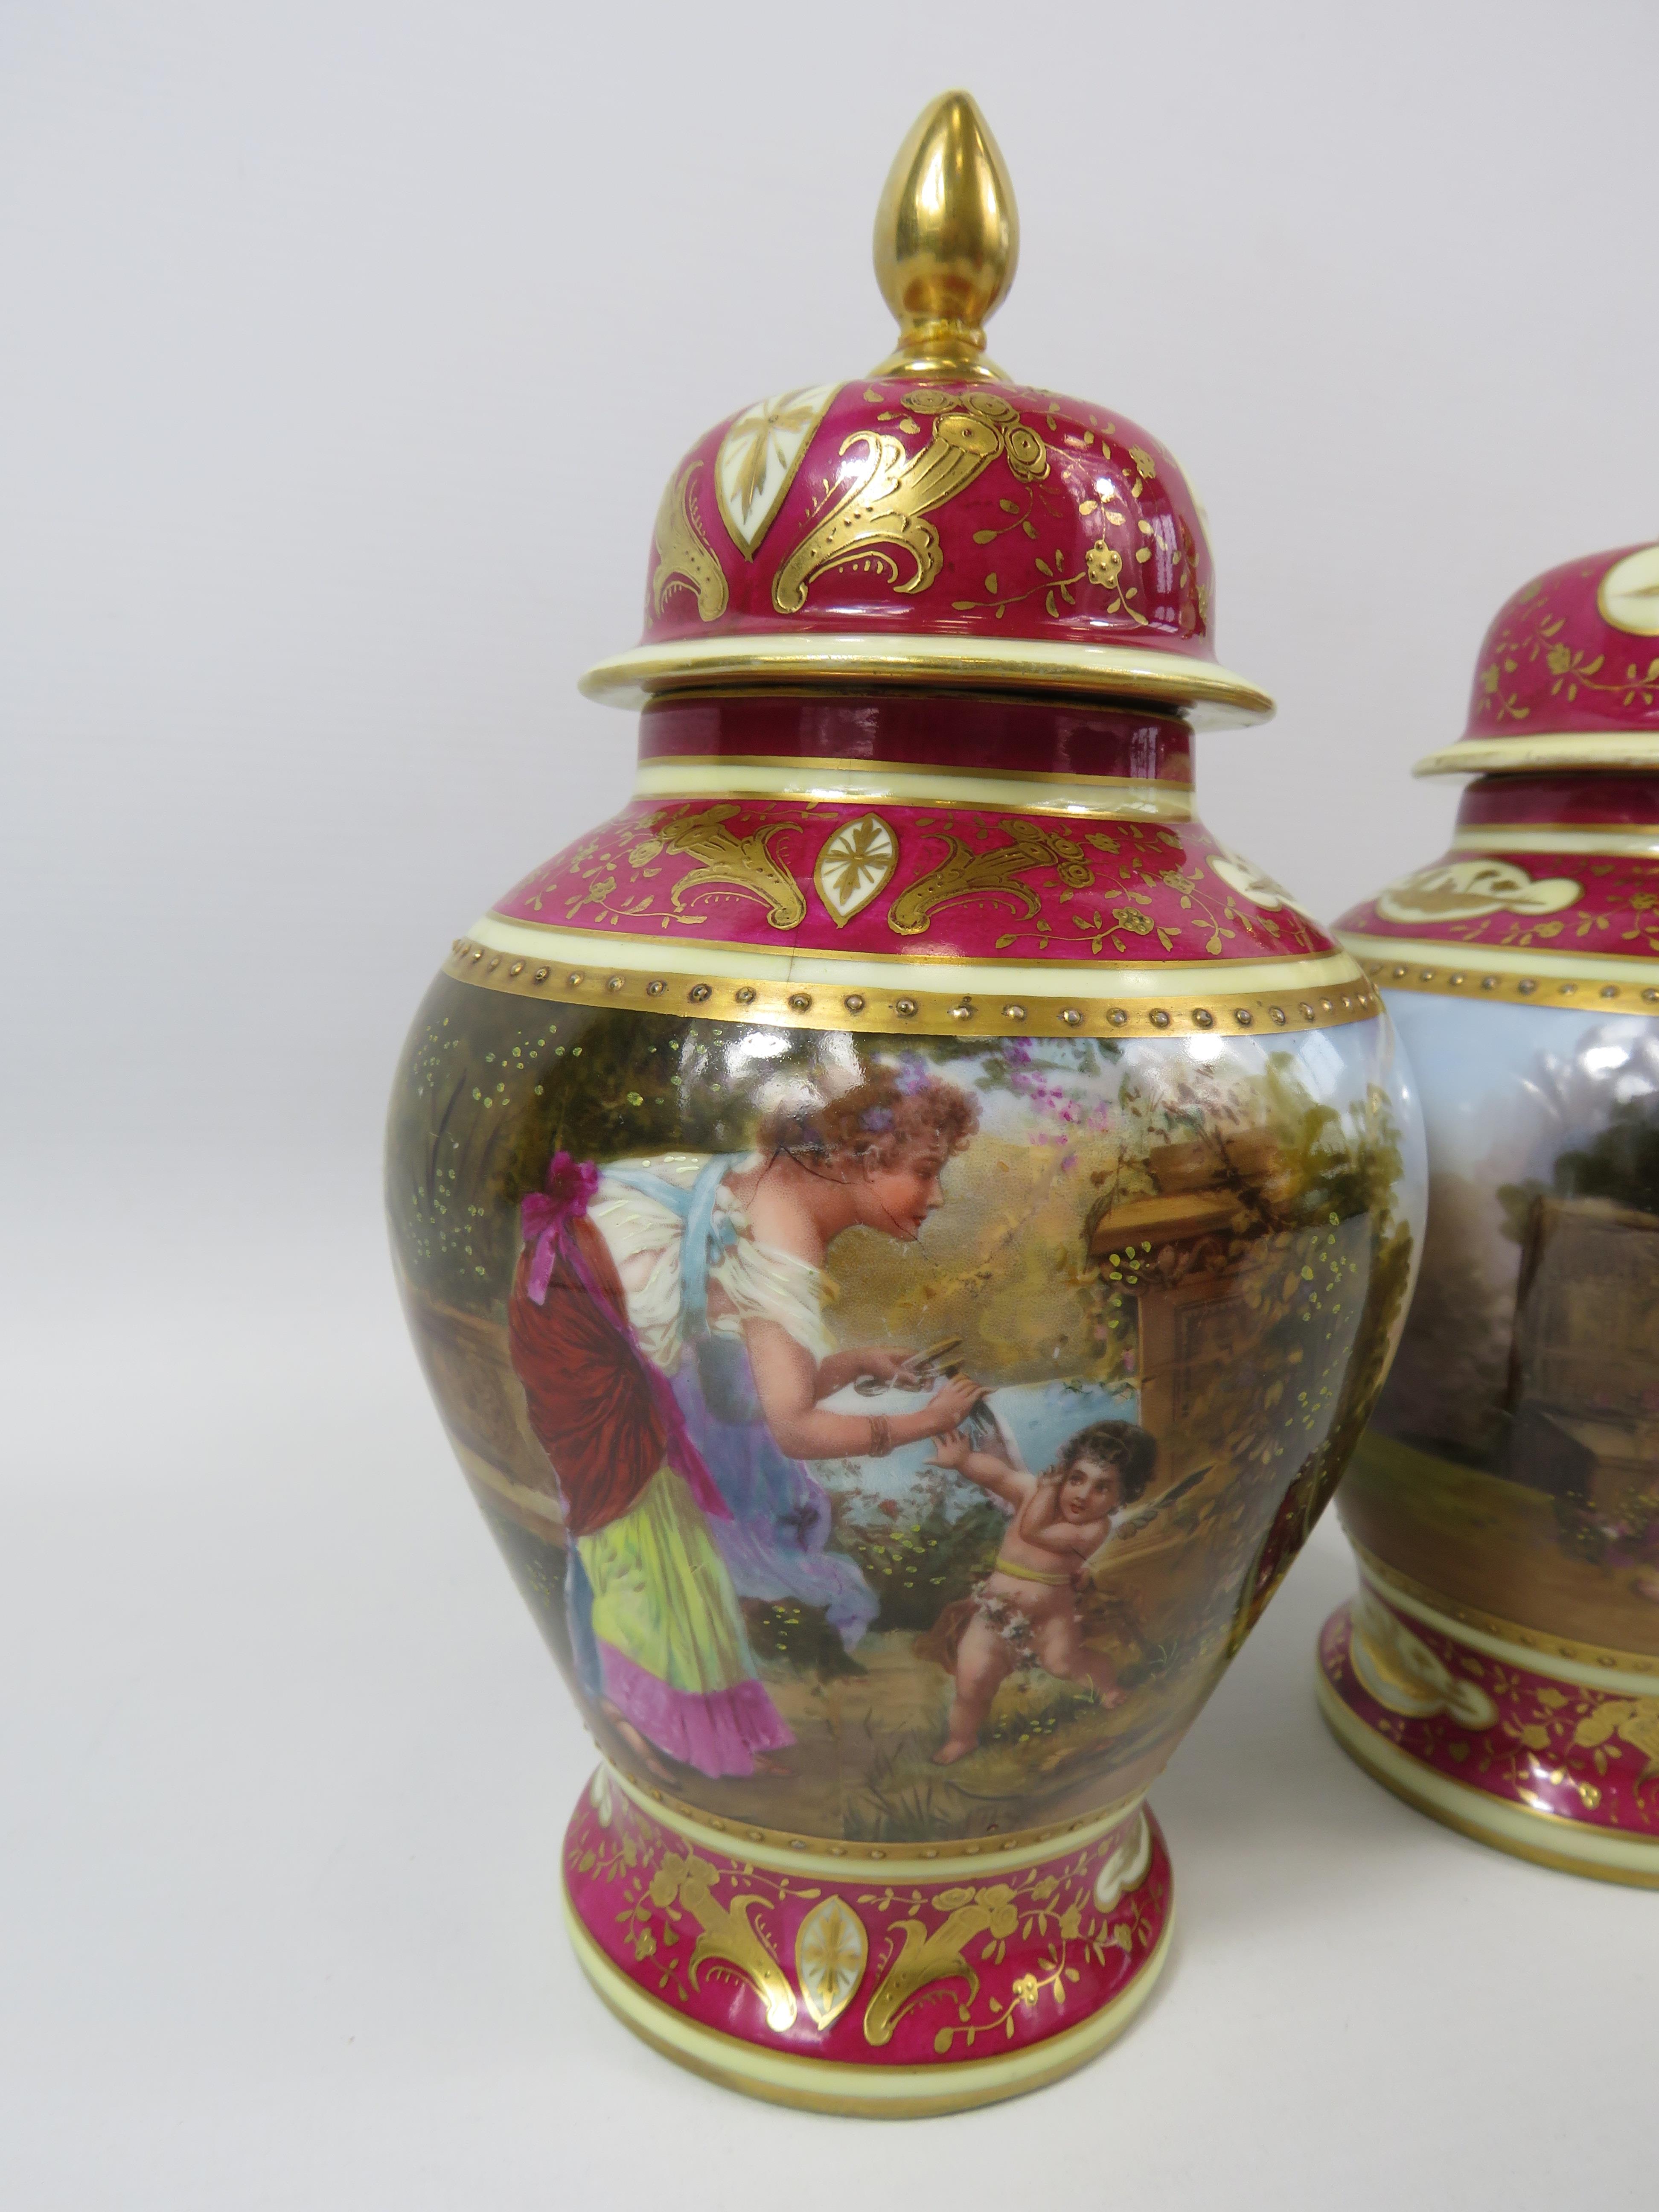 Pair of Vienna style lidded urn vases, both have had a repair/ damage to the lids. Approx 9" tall. - Image 2 of 6